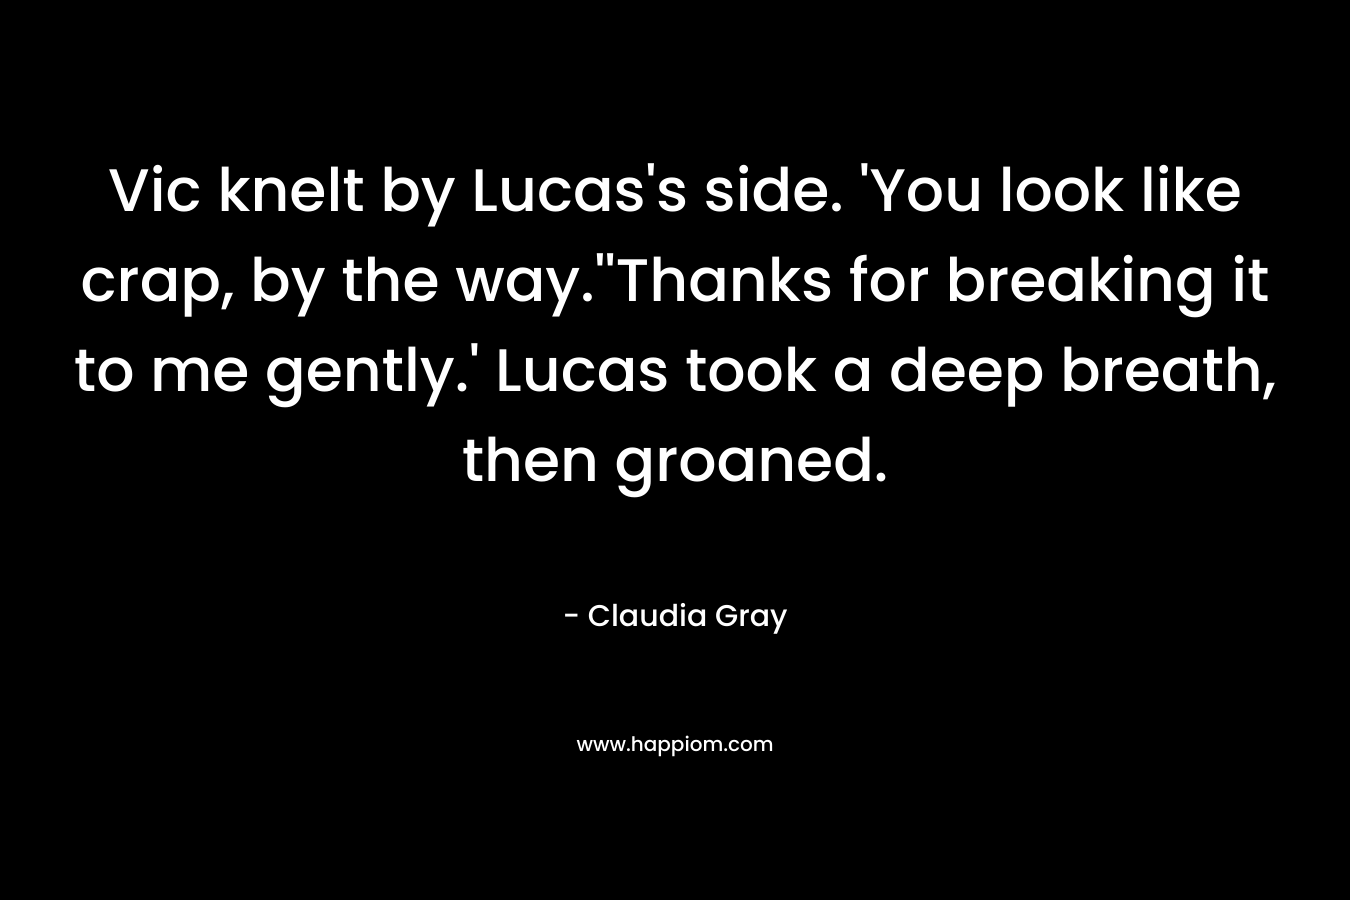 Vic knelt by Lucas’s side. ‘You look like crap, by the way.”Thanks for breaking it to me gently.’ Lucas took a deep breath, then groaned. – Claudia Gray